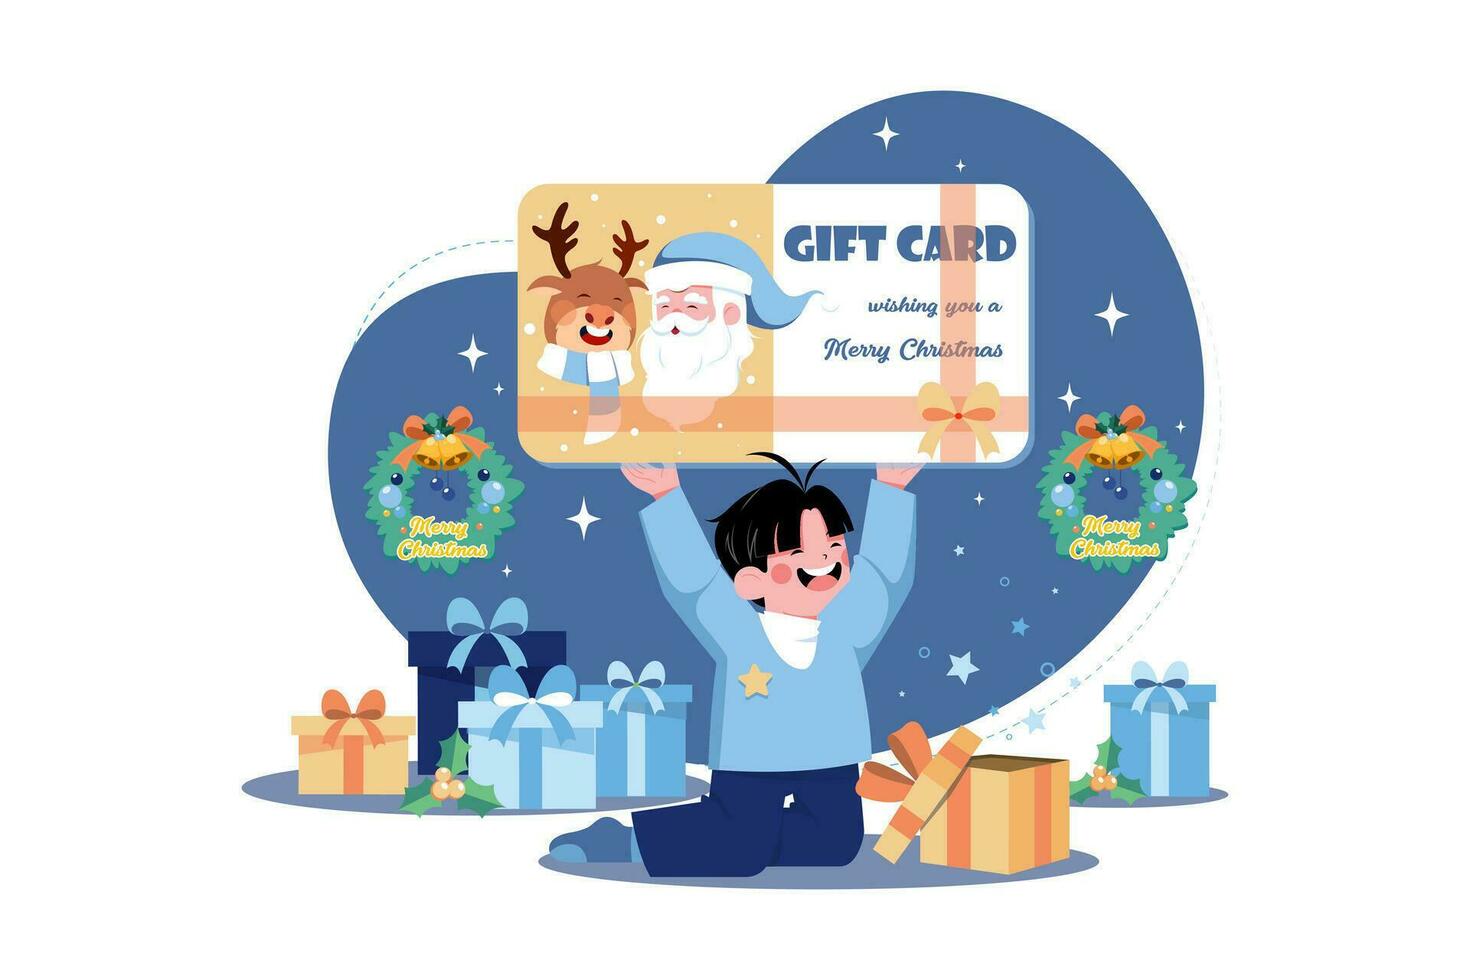 Christmas Gift Card Illustration concept on white background vector